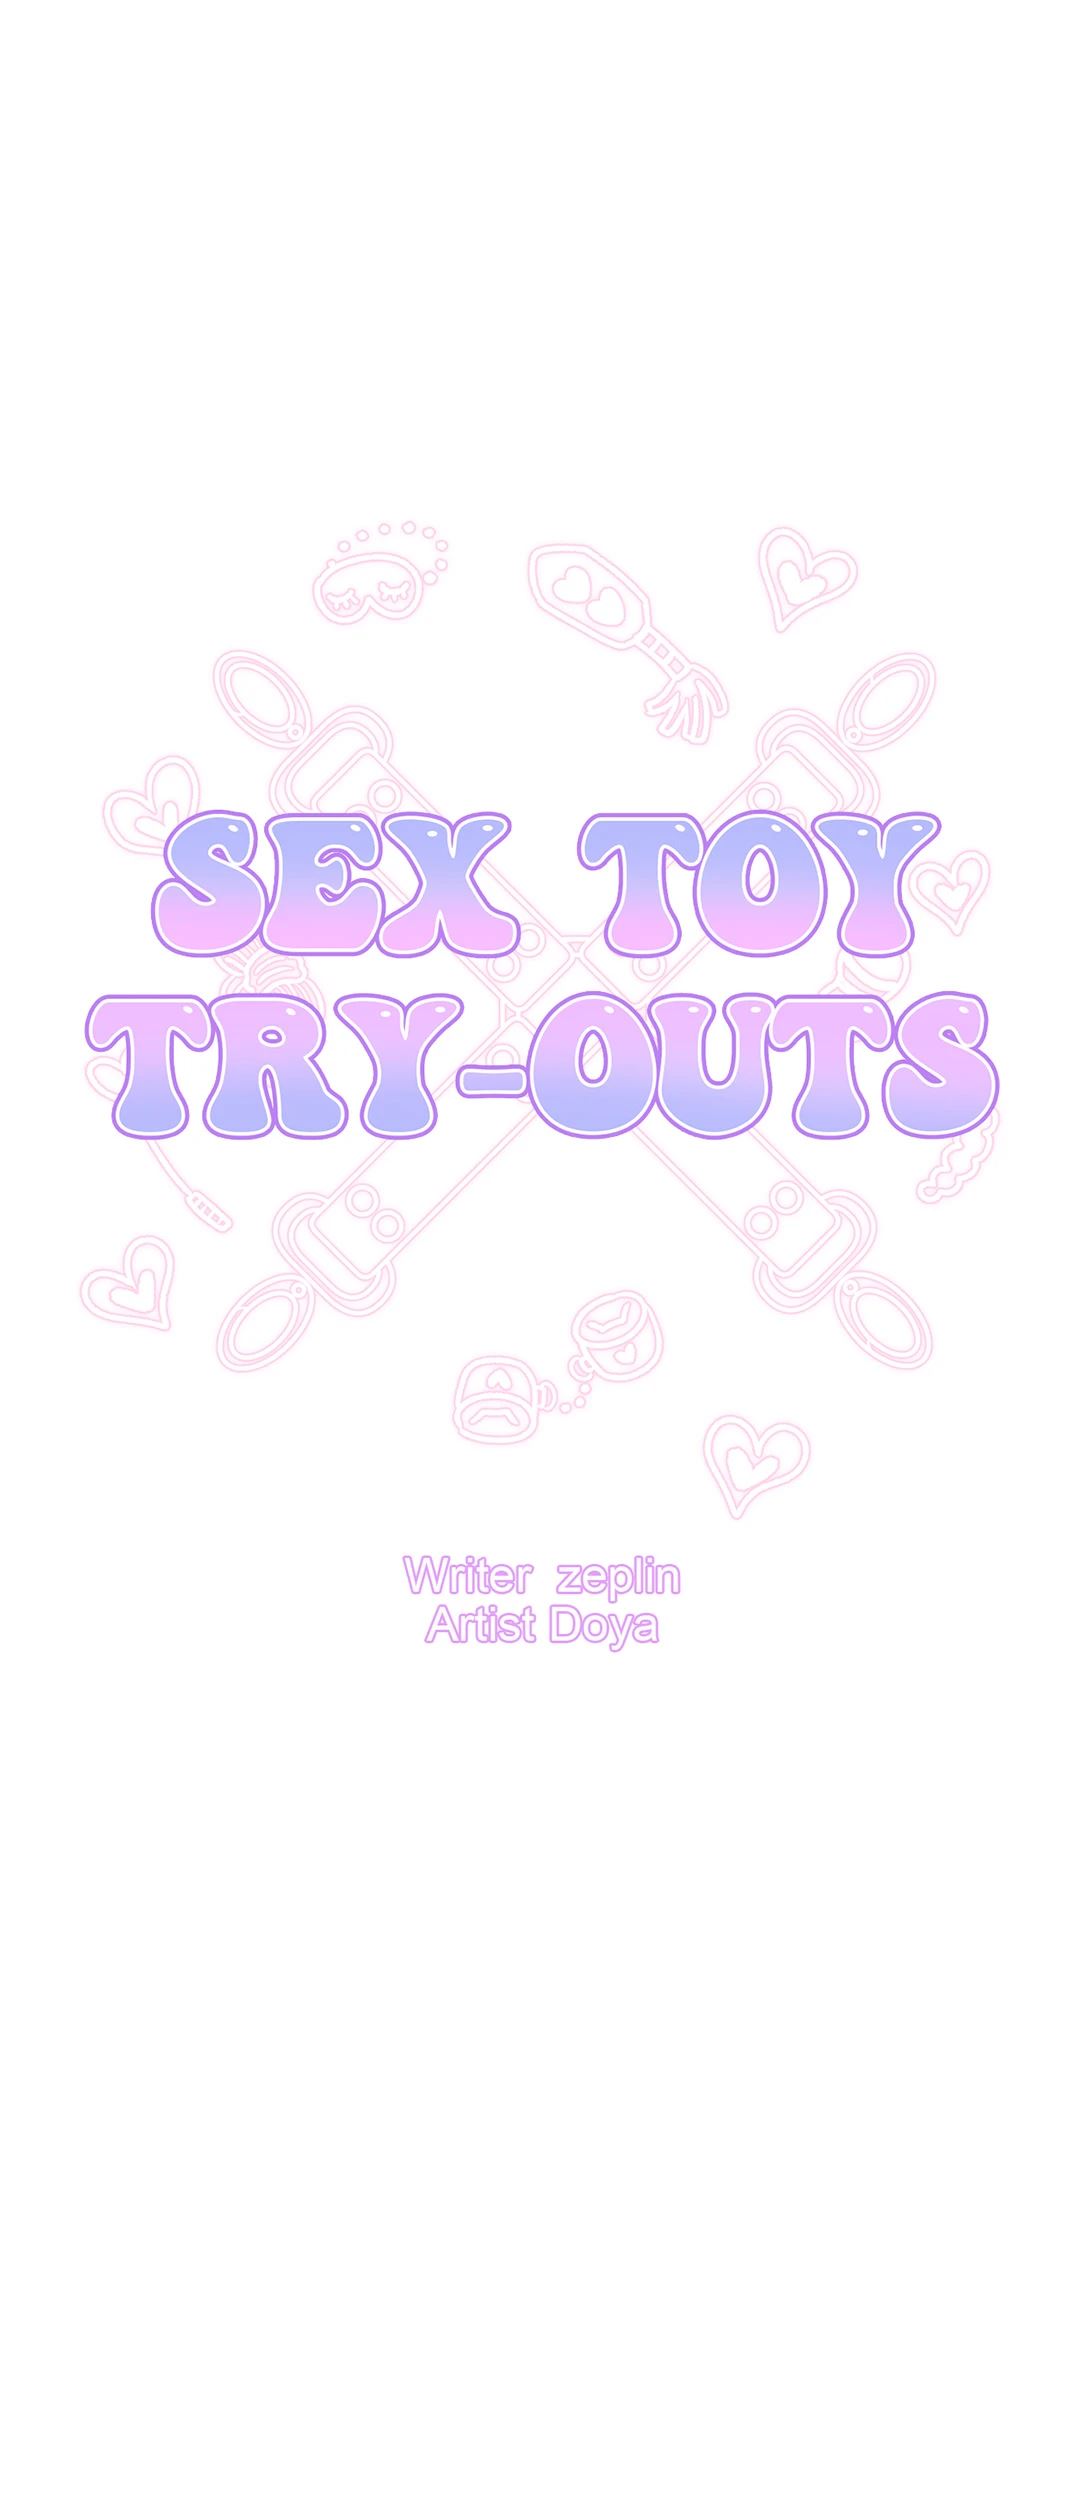 Sex Toy Try-Outs image